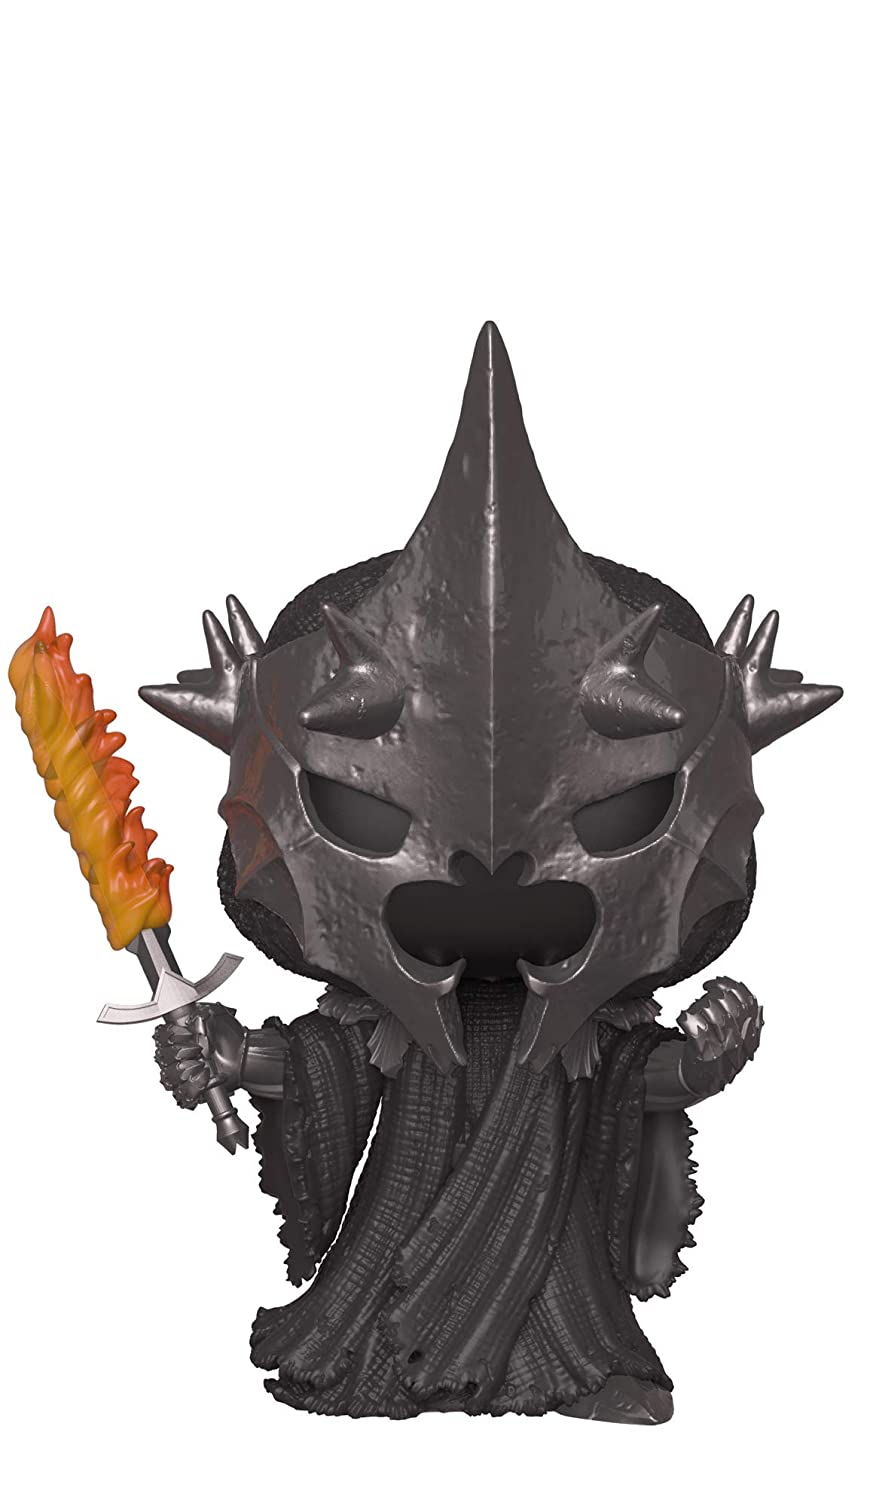 Funko Pop Movies Lord of The Rings - Witch King Vinyl Figure